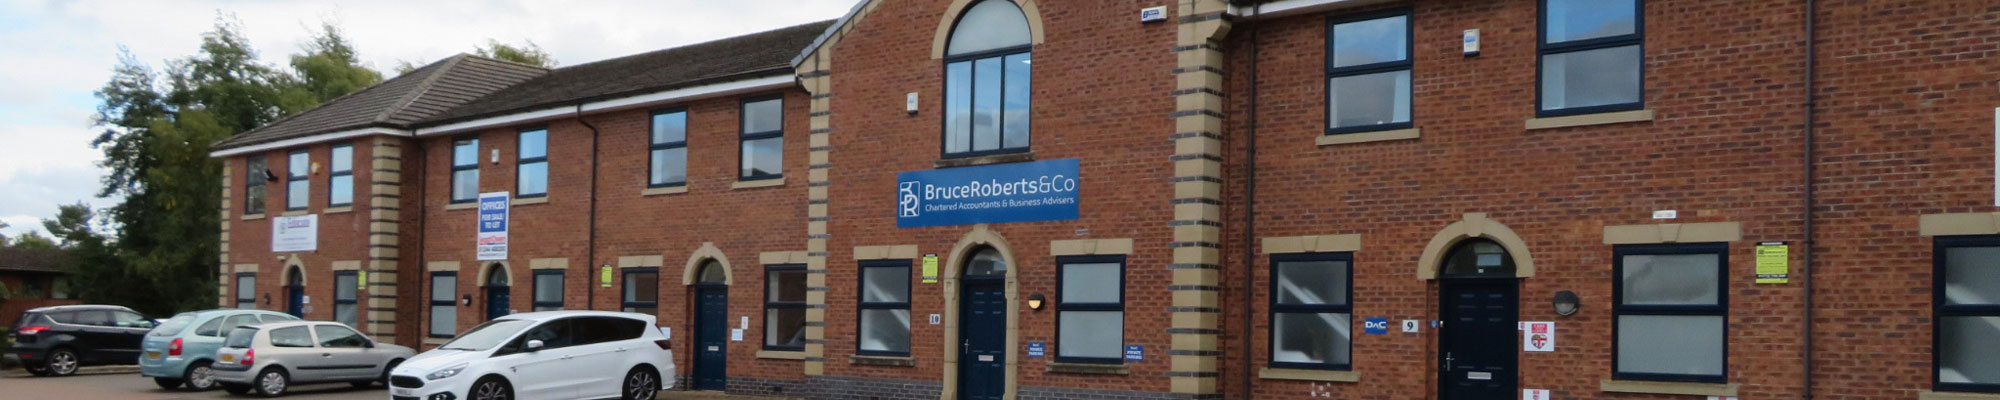 Exterior view of the Bruce Roberts & Co premises in Wrexham